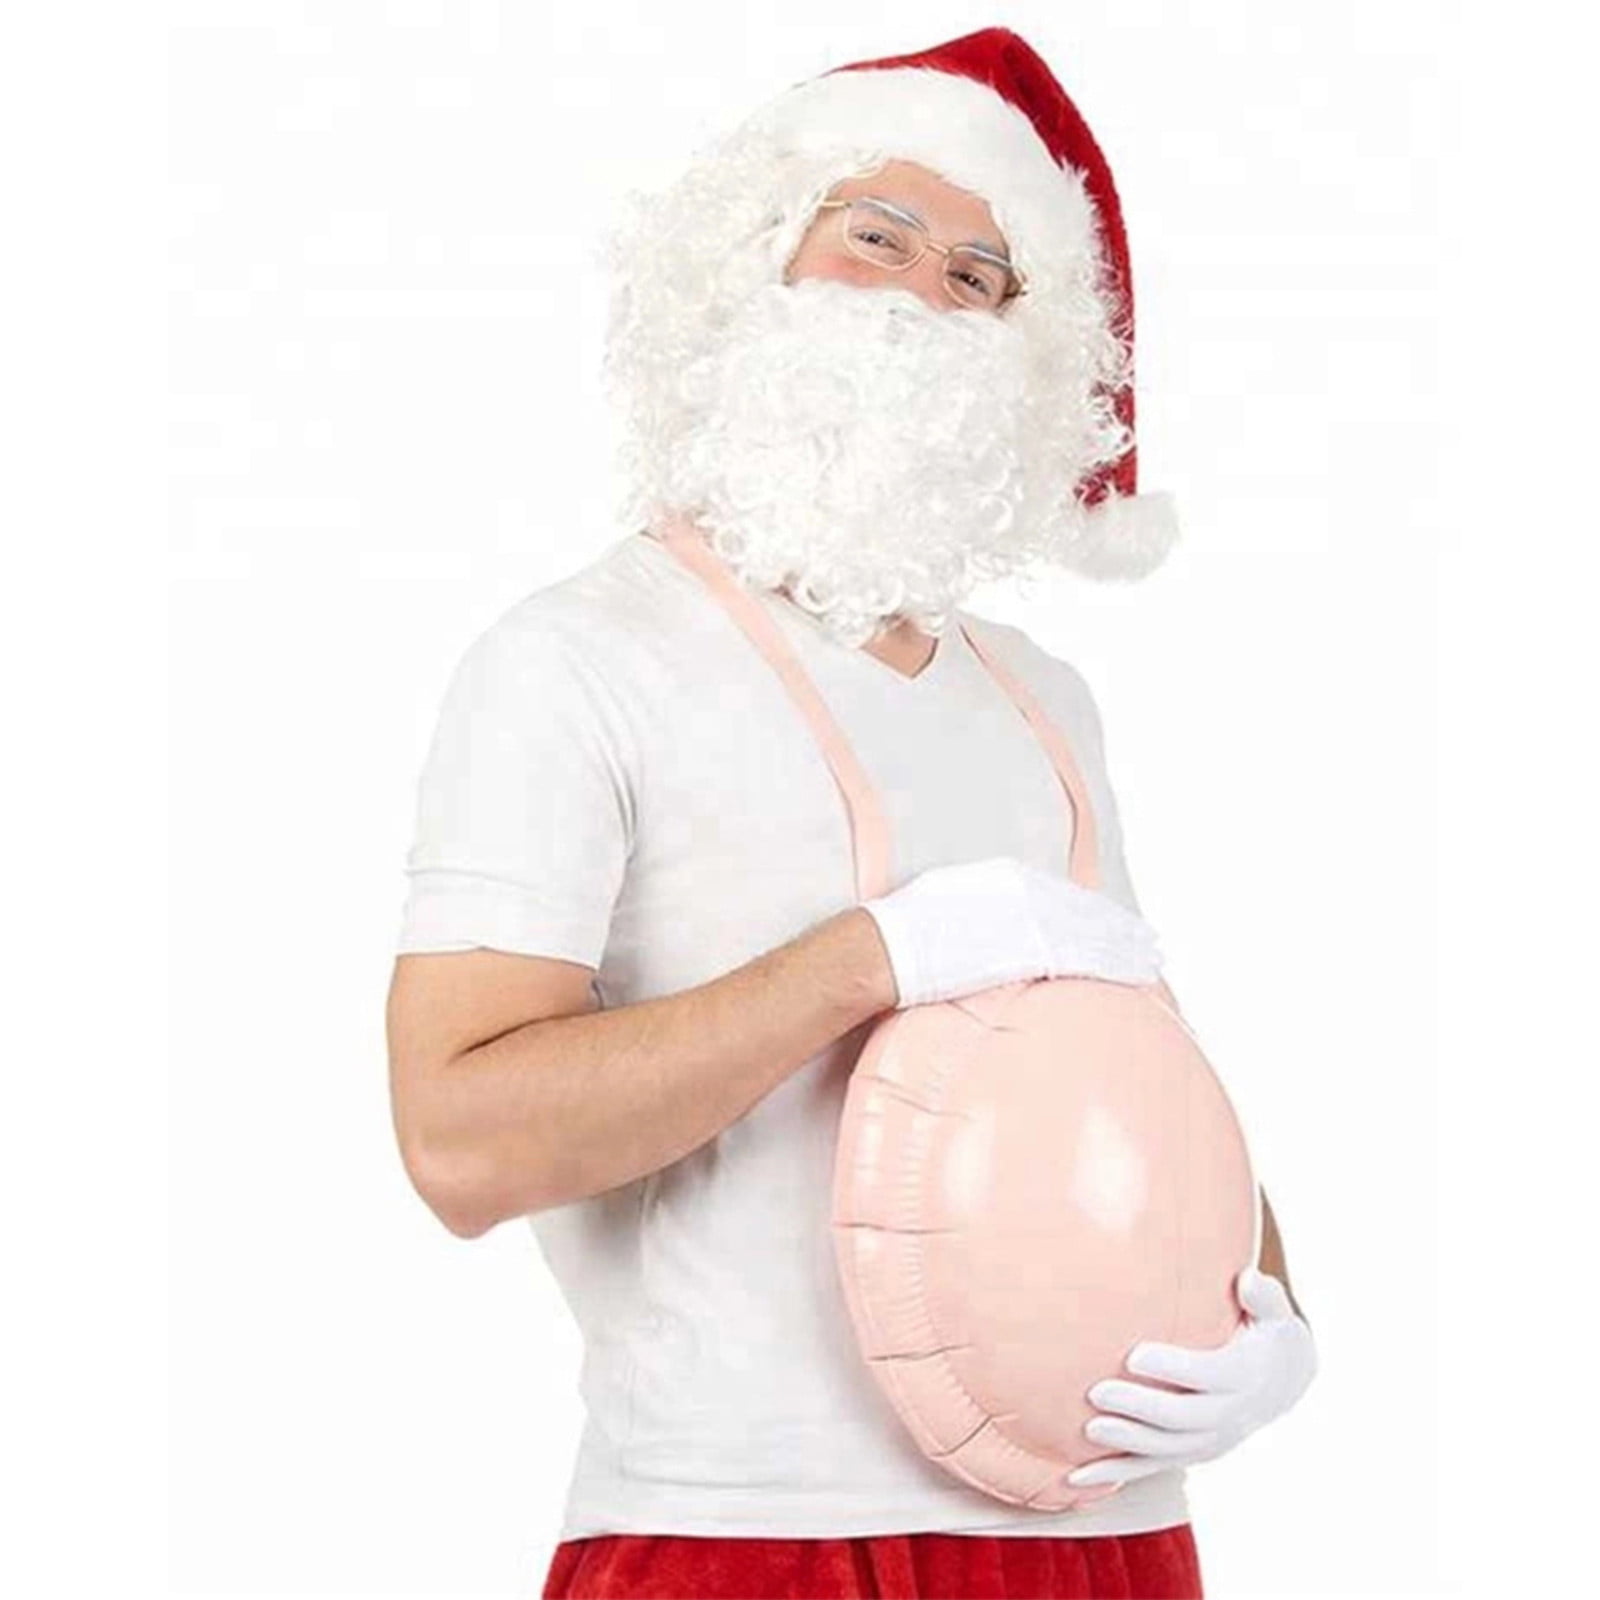 Sumind 2 Pieces Christmas Santa Claus Inflatable Belly Empty Fake Pregnancy Belly Cosplay Belly Fake Padded Belly for Christmas Cosplay Party